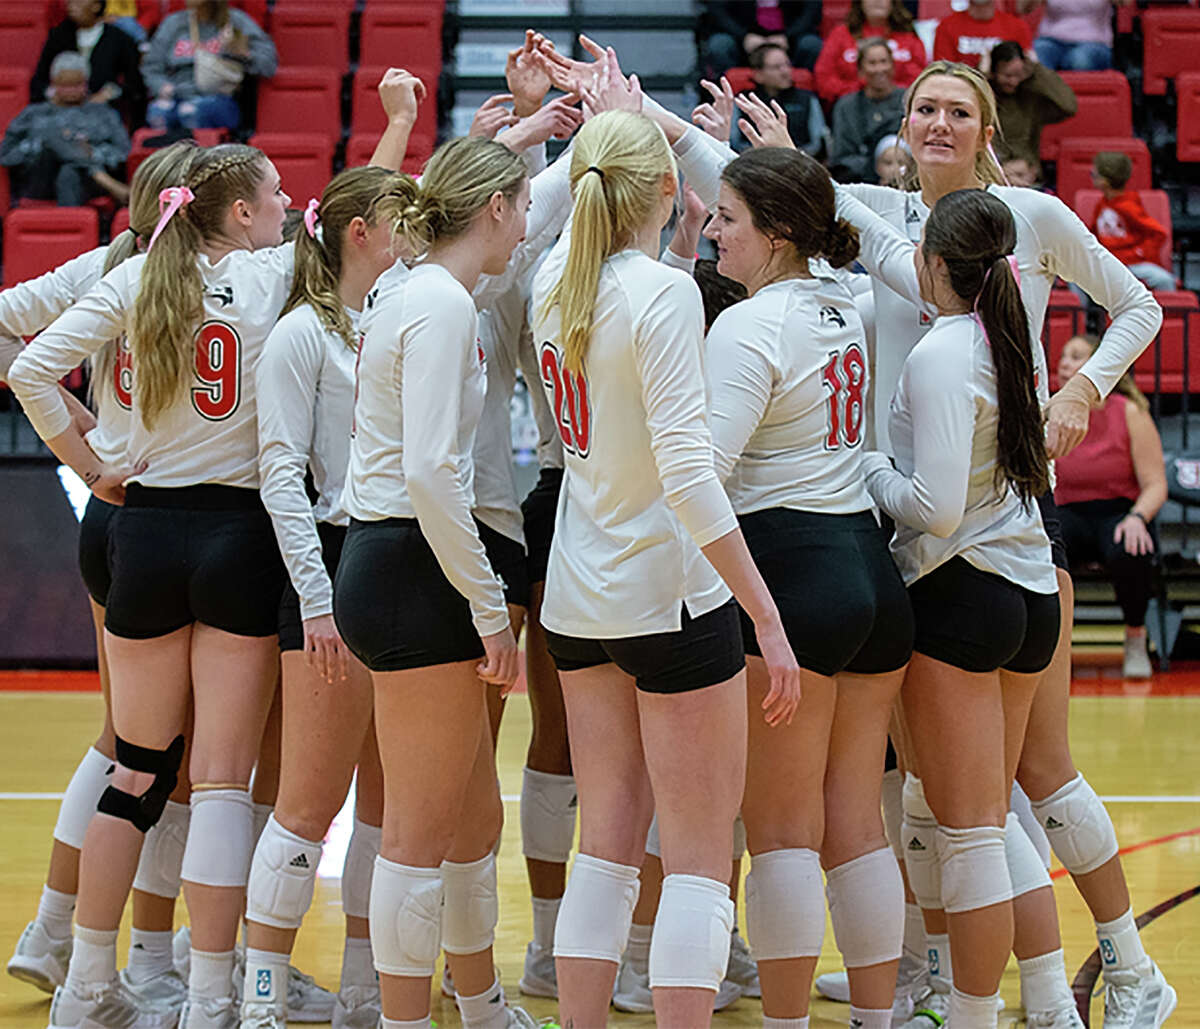 For the second consecutive year, the SIUE volleyball team has earned the Ohio Valley Conference's Team Sportsmanship Award.